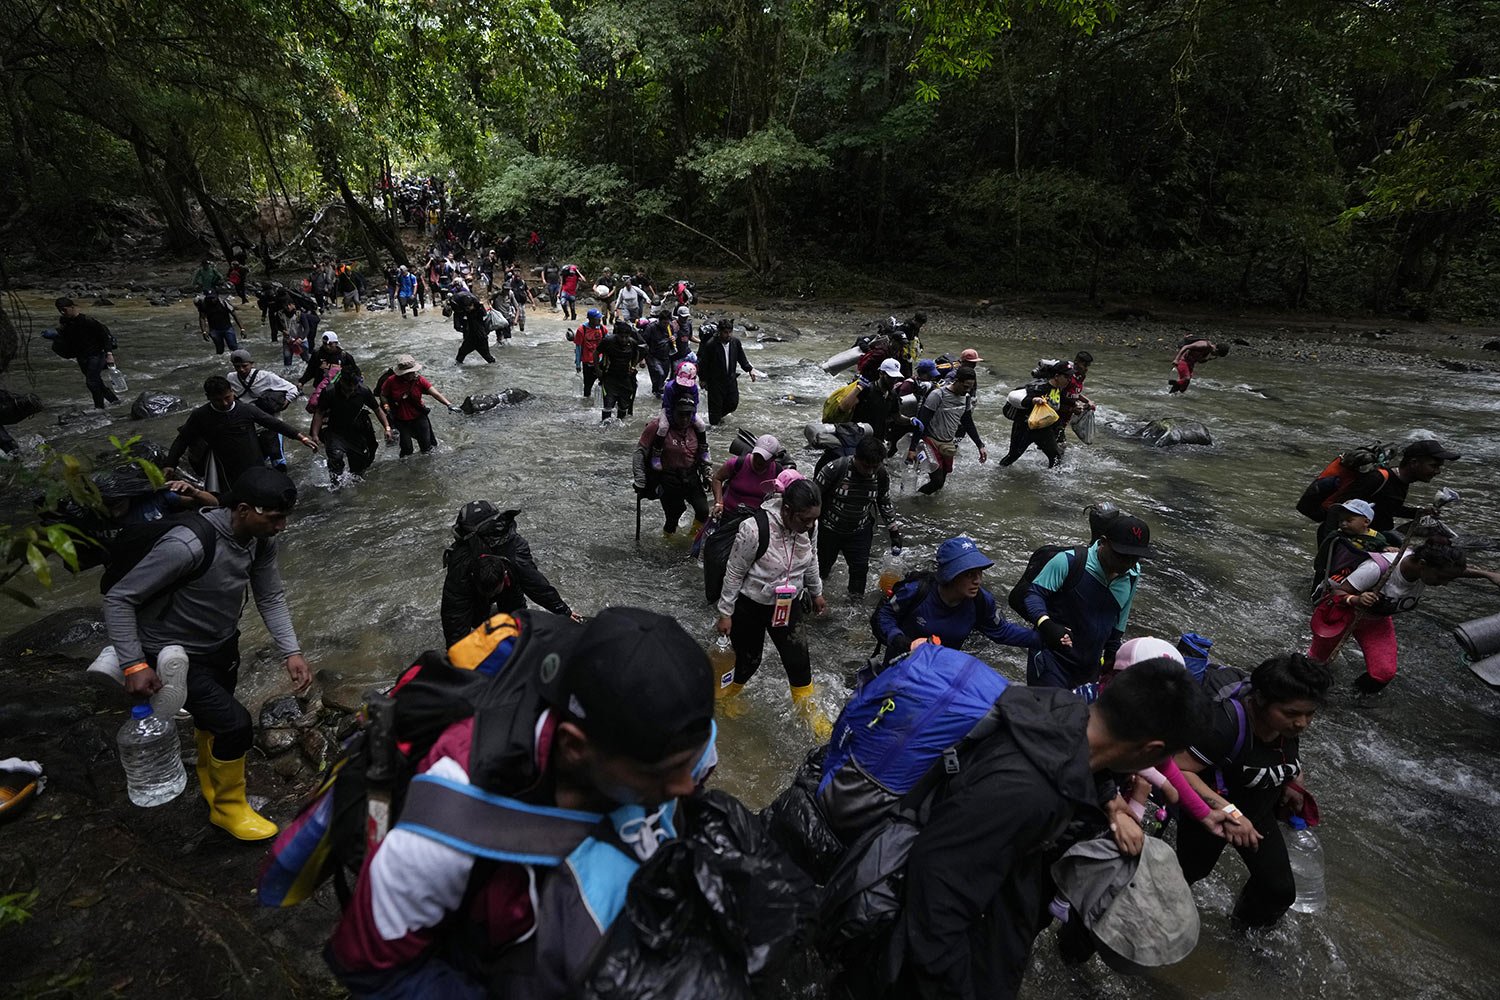  Migrants, mostly Venezuelans, cross a river during their journey through the Darien Gap from Colombia into Panama, Oct. 15, 2022. (AP Photo/Fernando Vergara) 